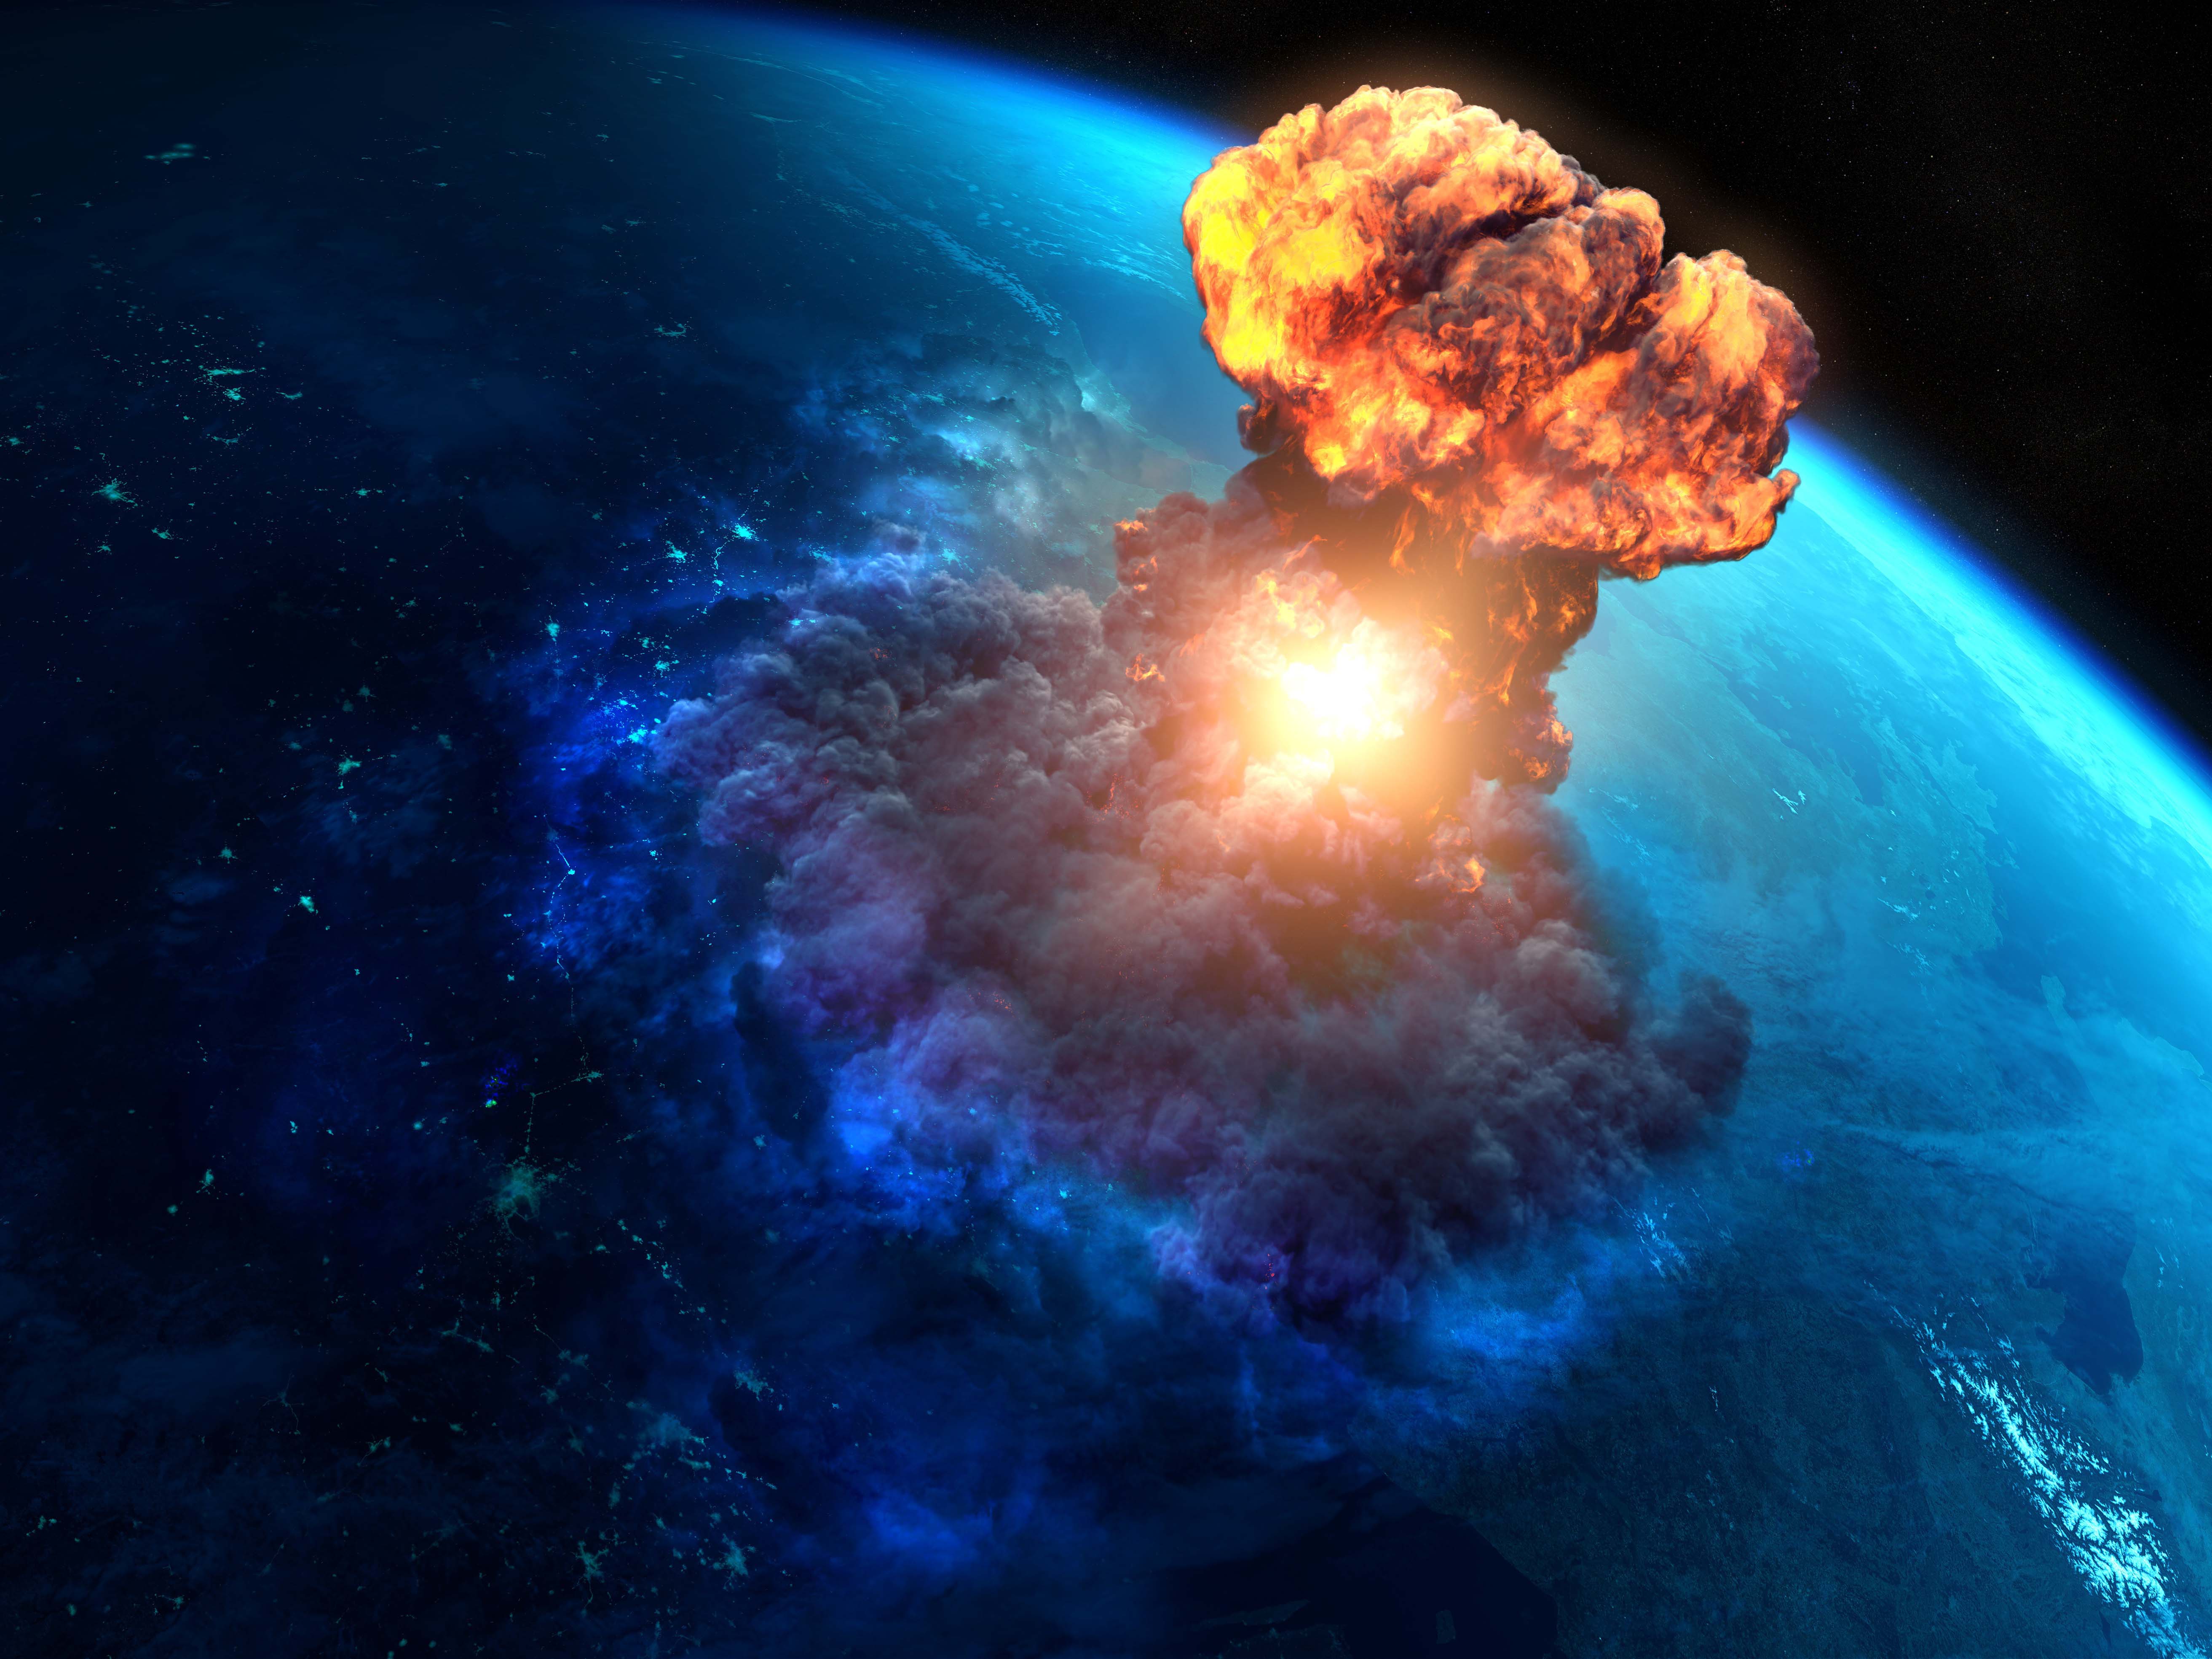 Image of a large mushroom cloud extending out from the surface of the Earth into space